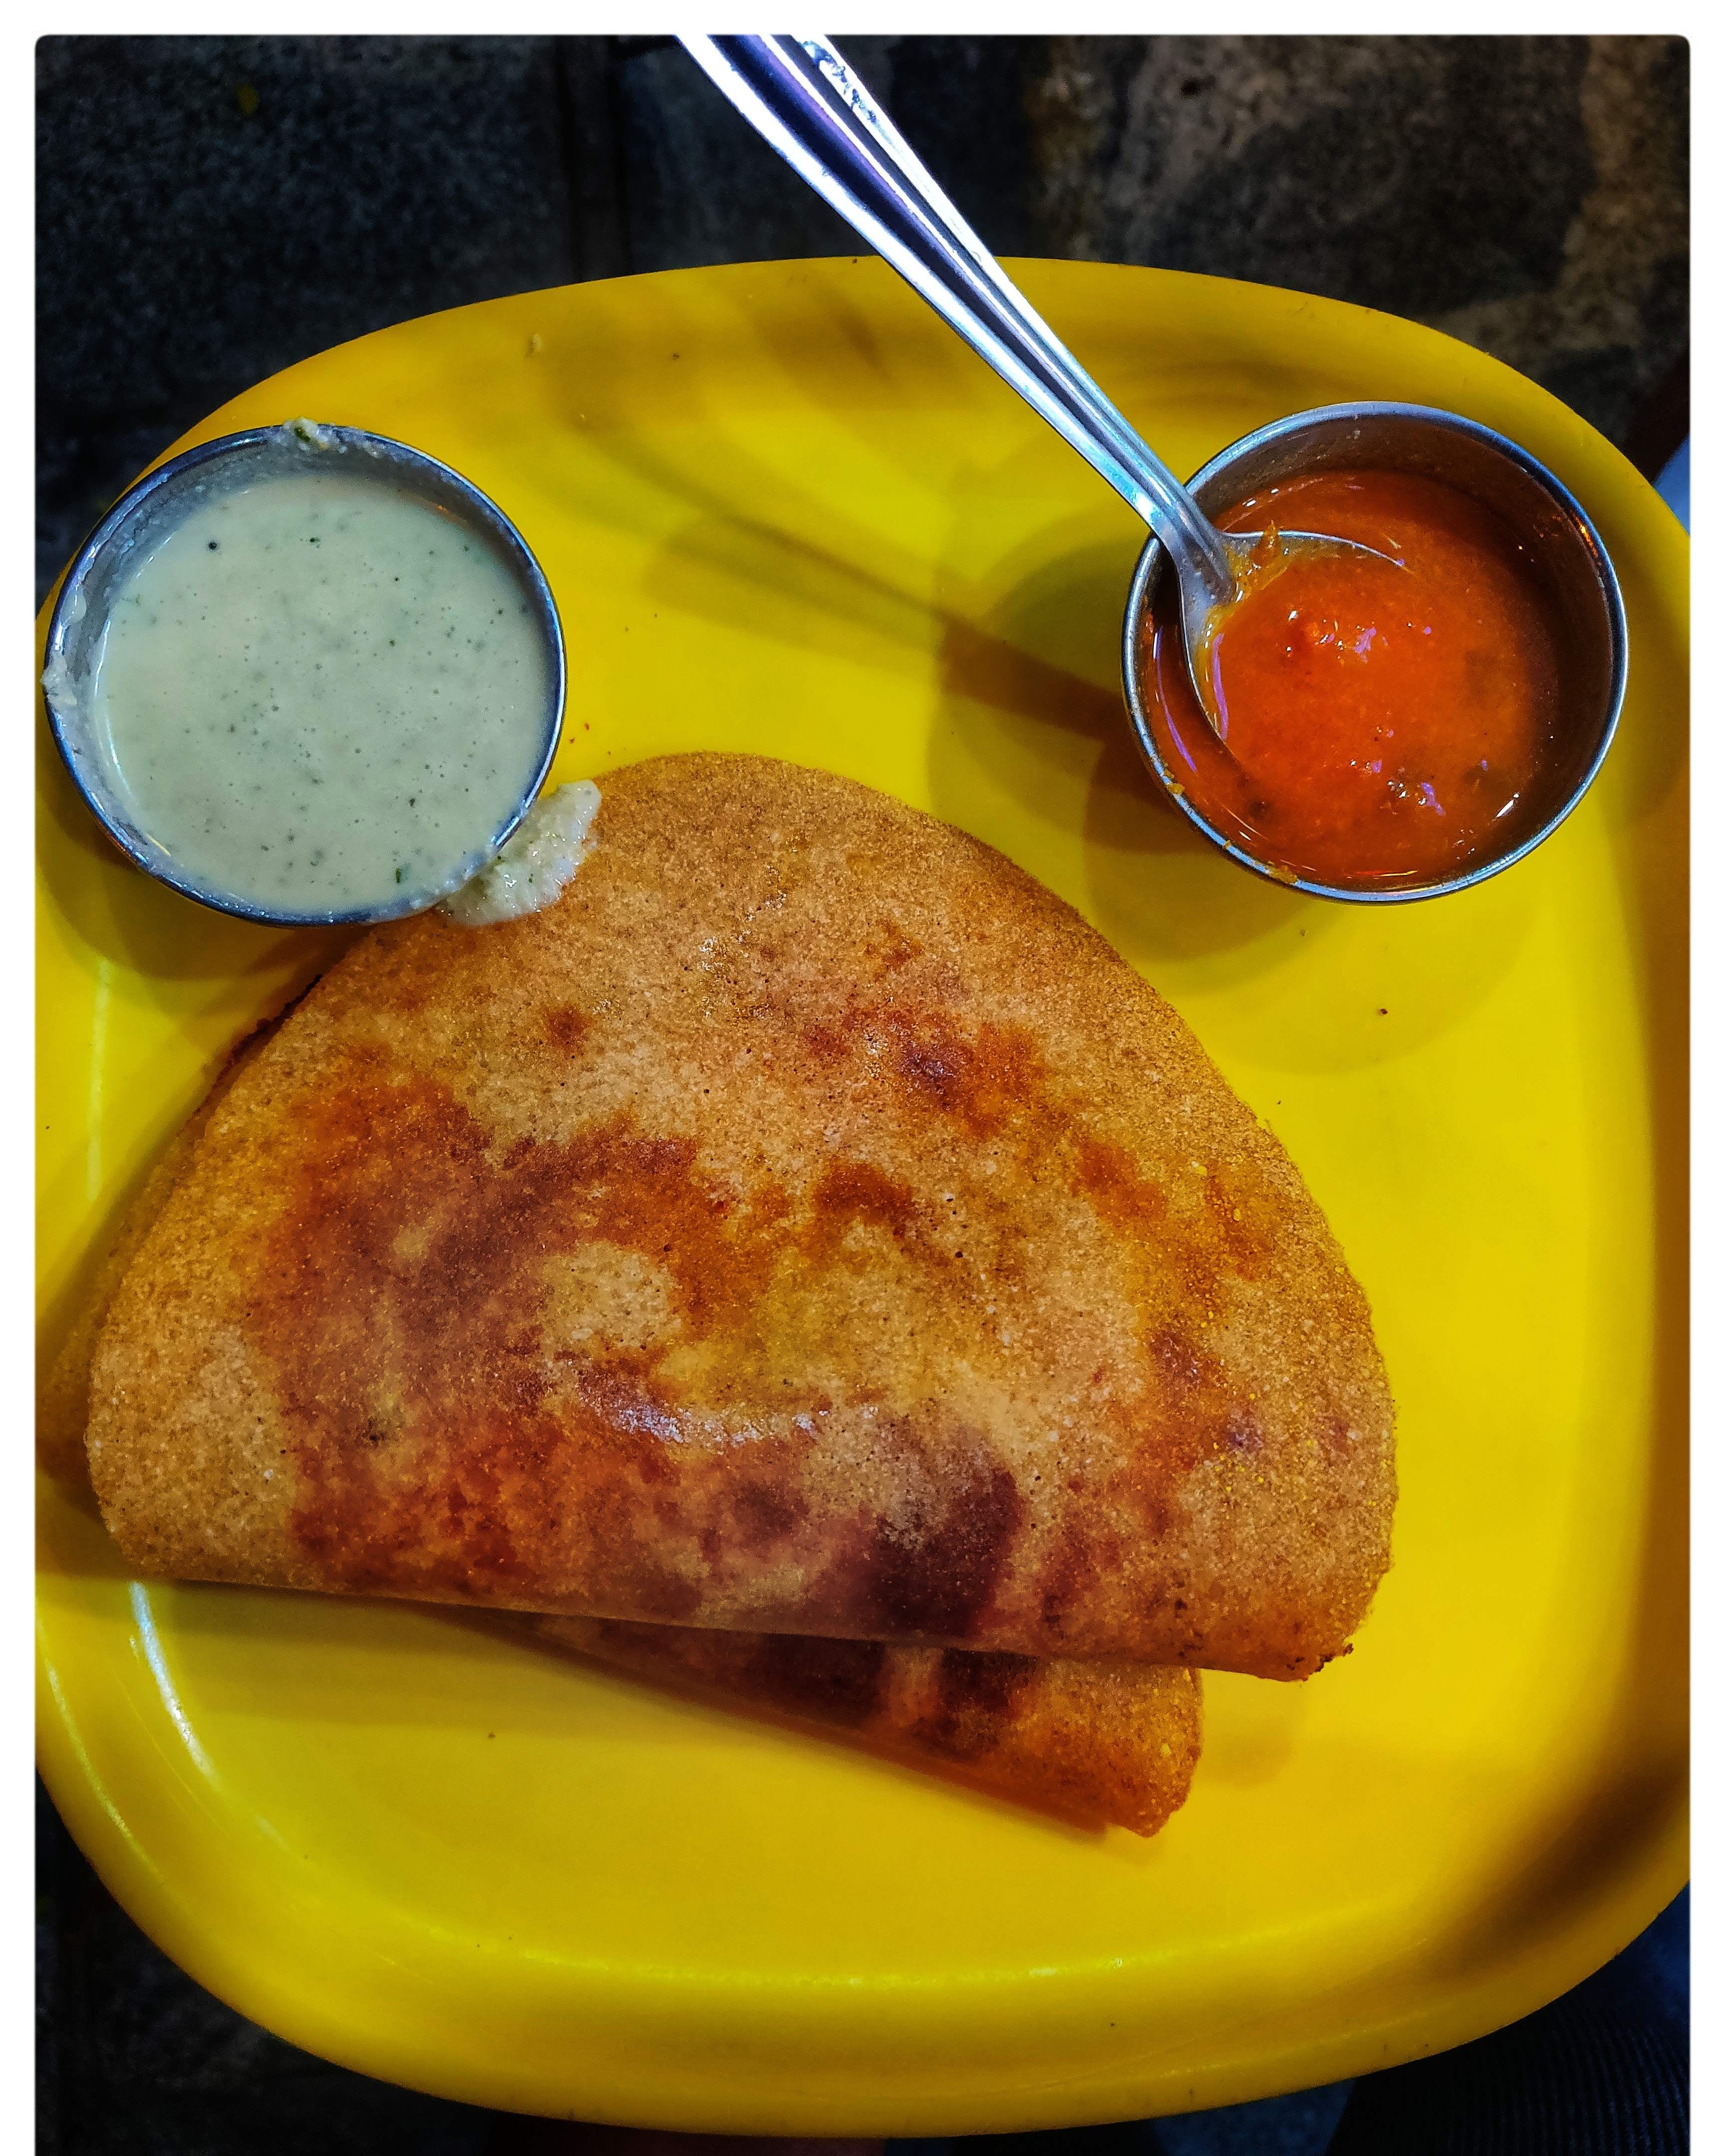 Anyday, Anytime Always Up For South Indian Breakfast.